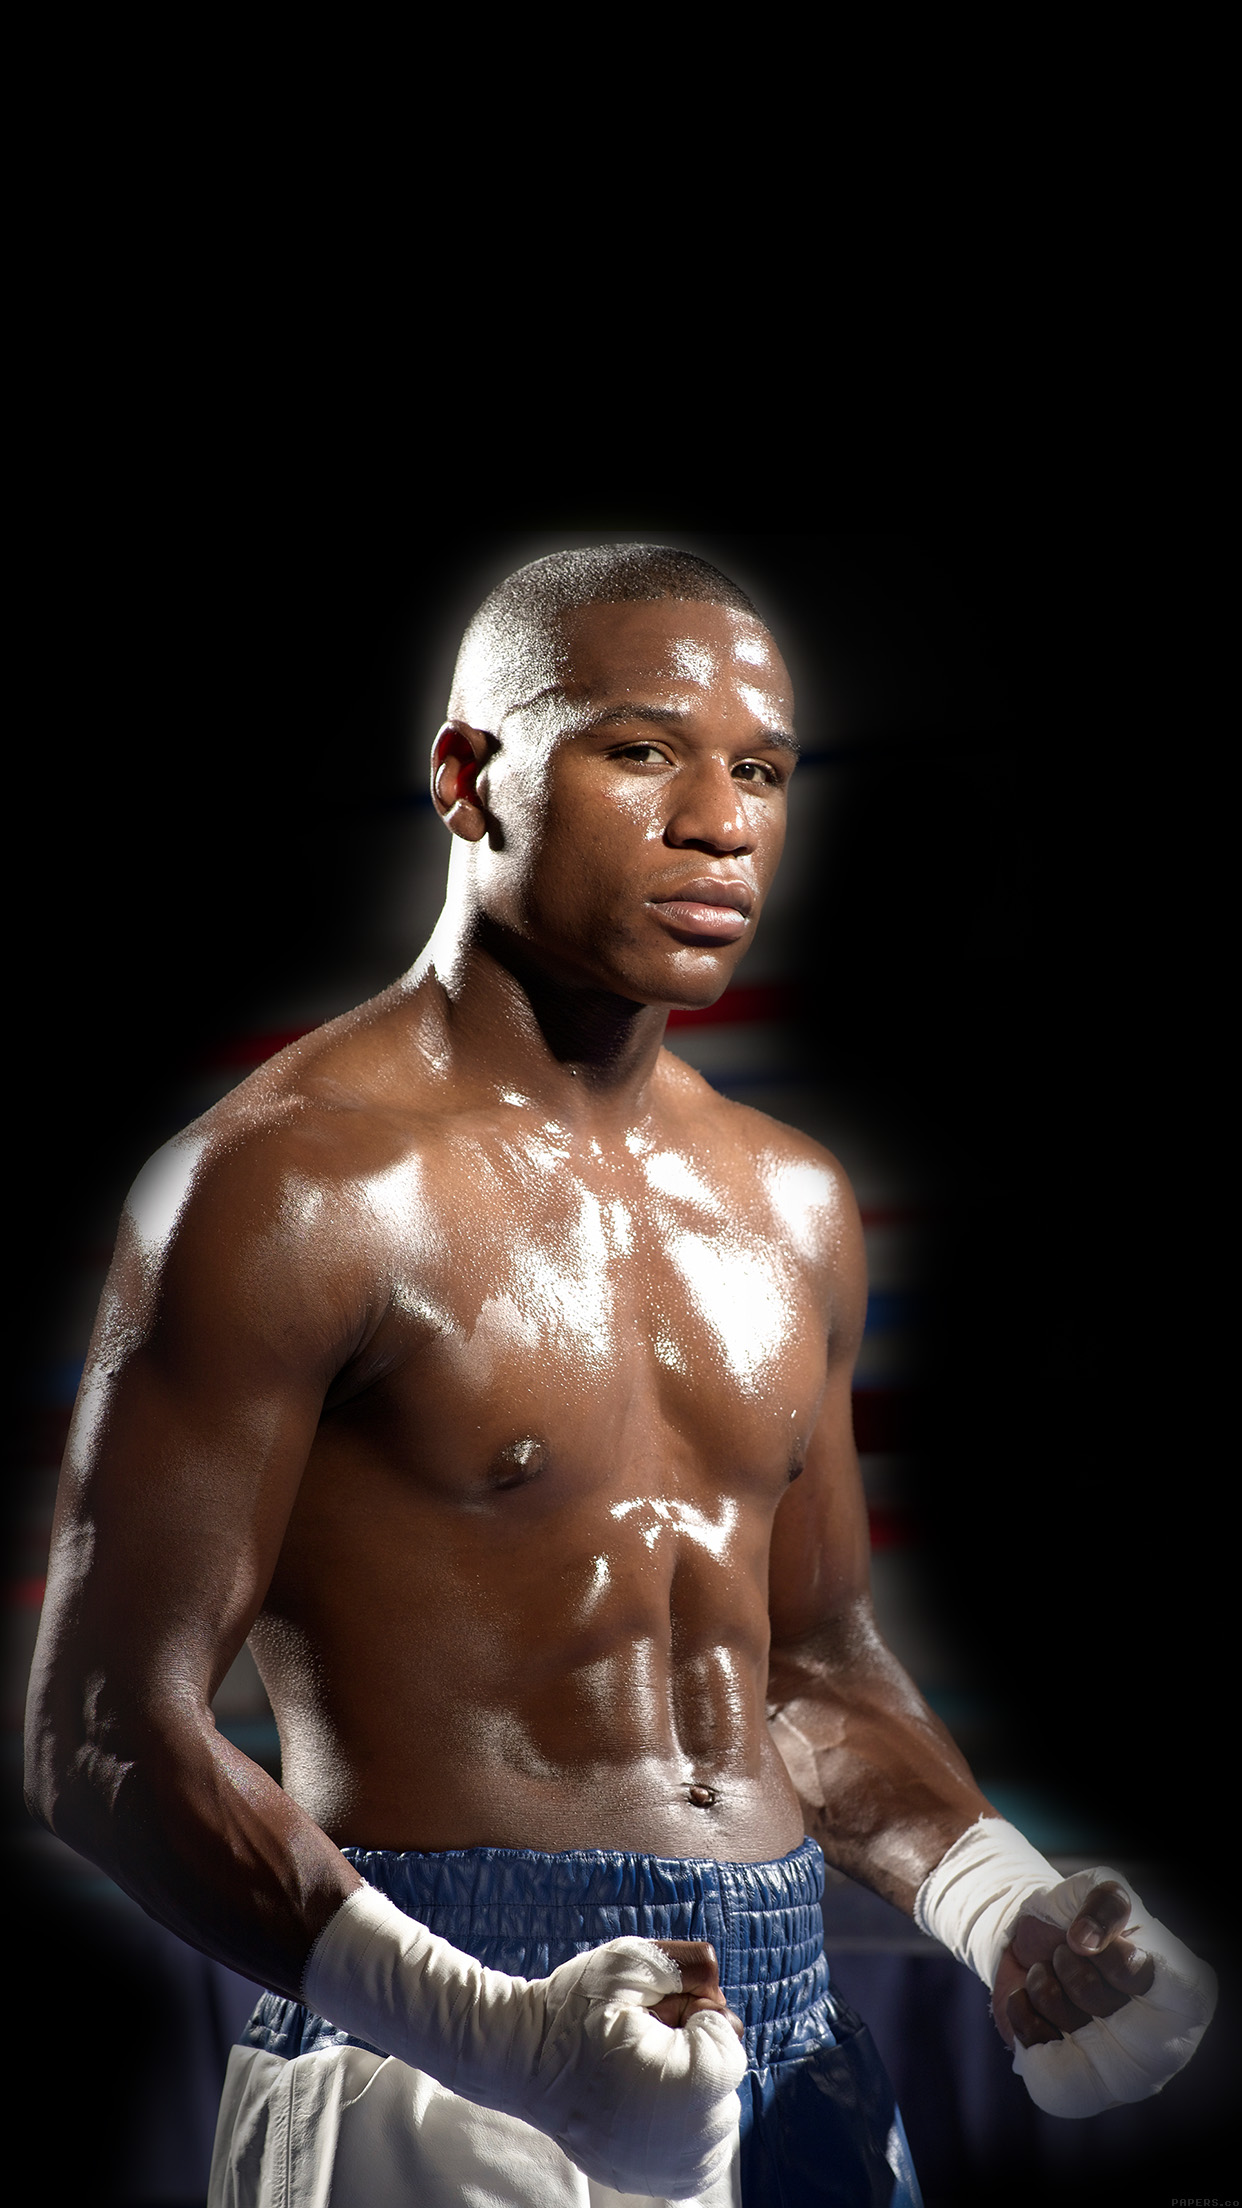 mayweather wallpaper hd,barechested,professional boxer,bodybuilder,muscle,chest